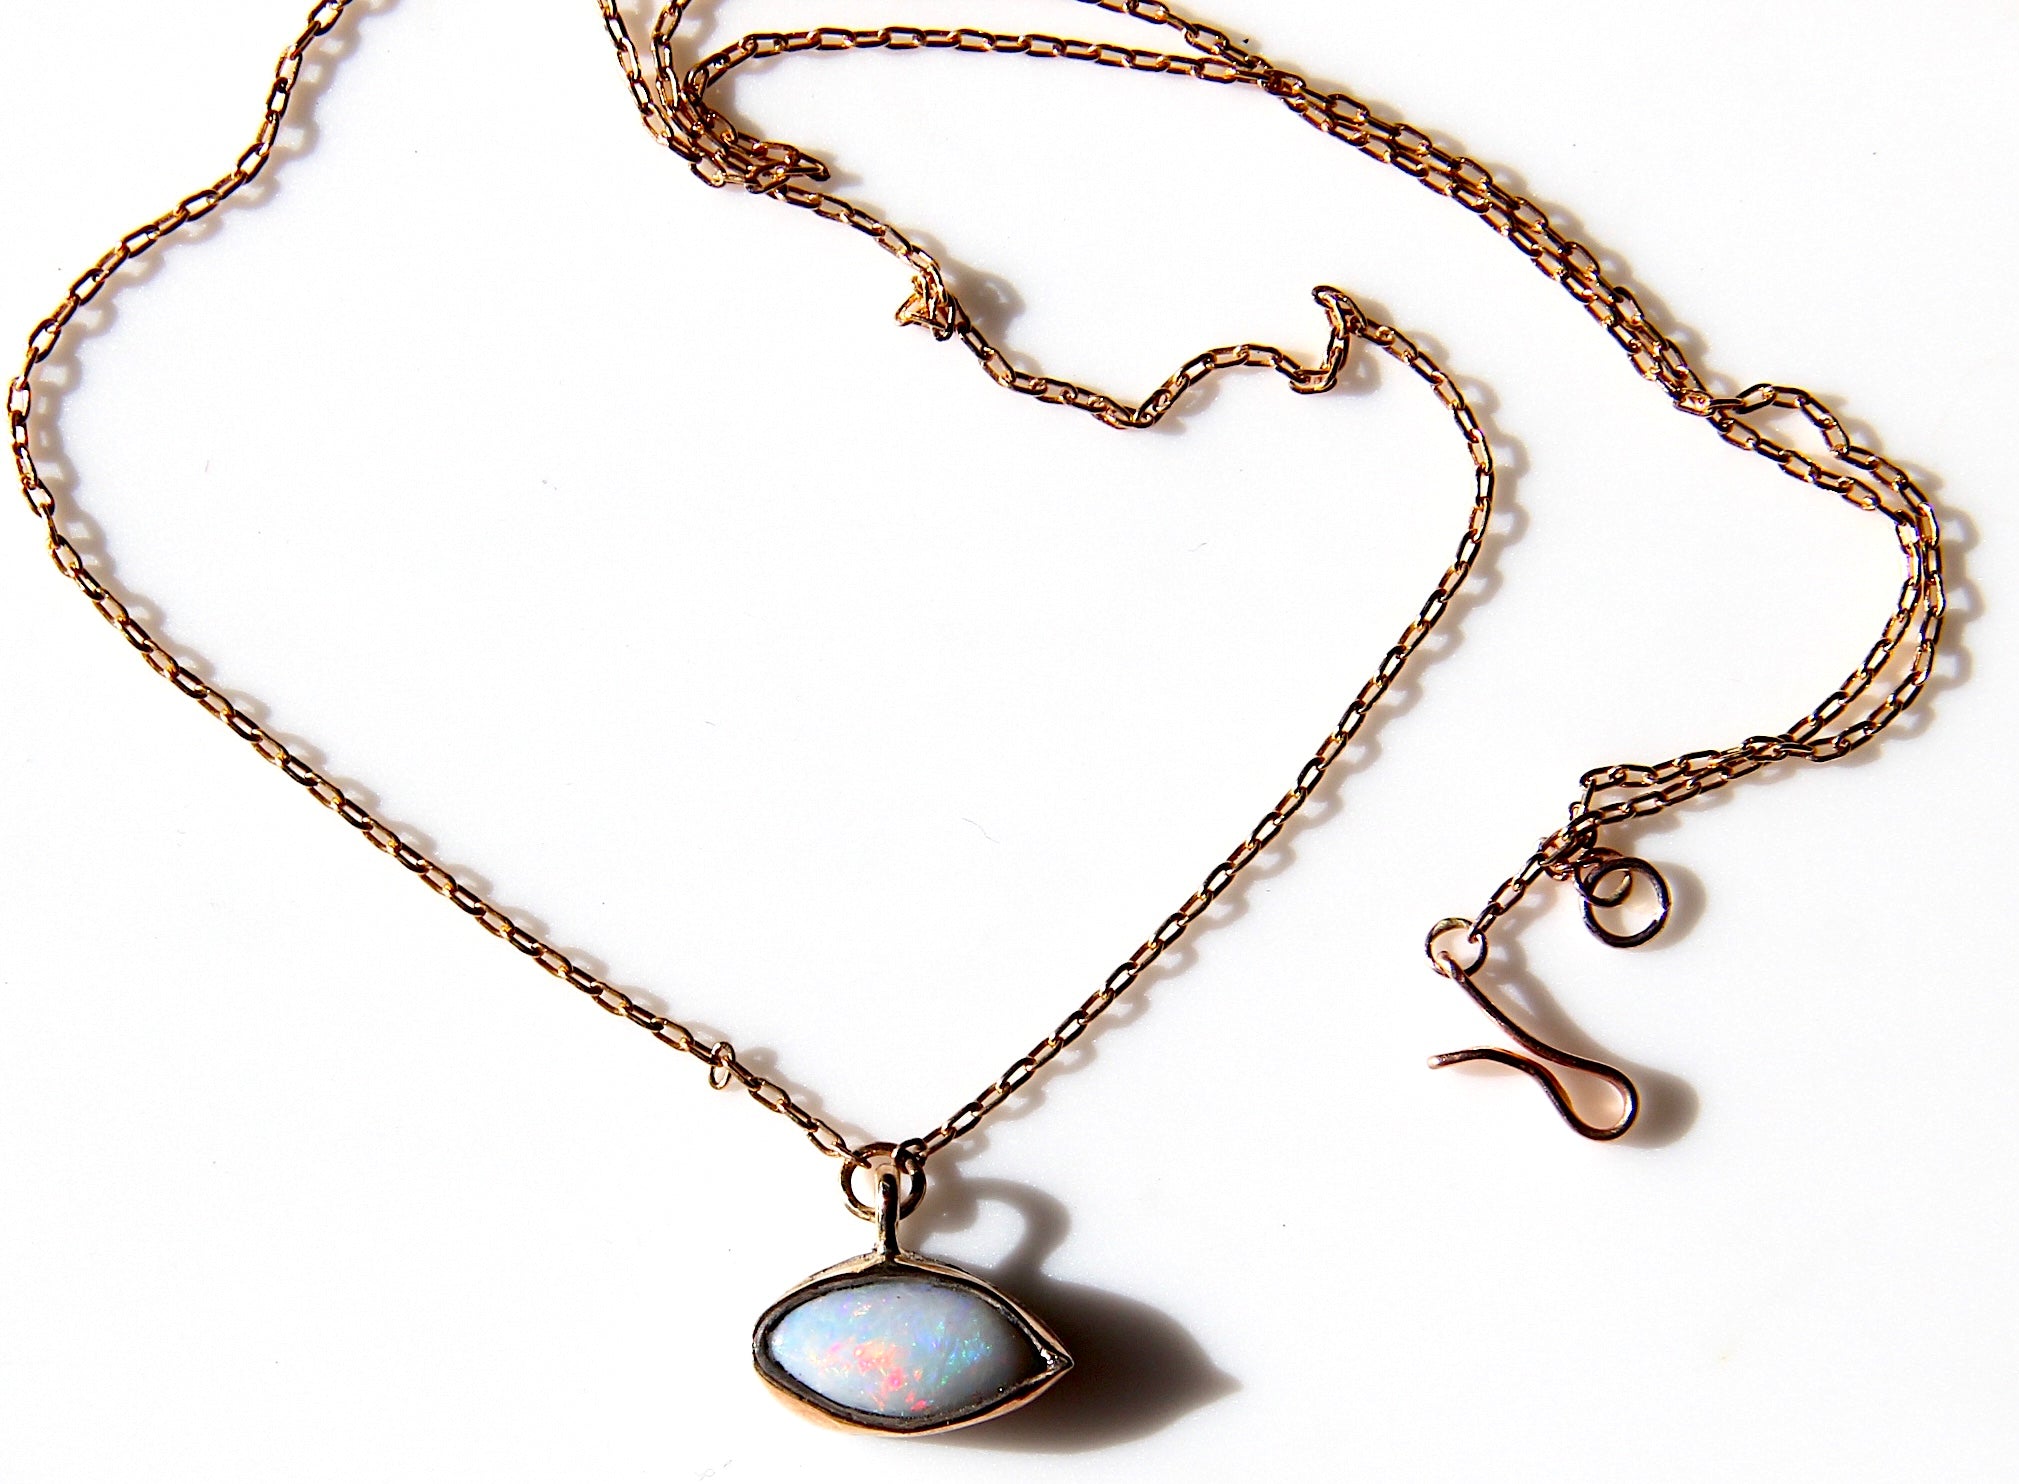 The Opal Eye Necklace